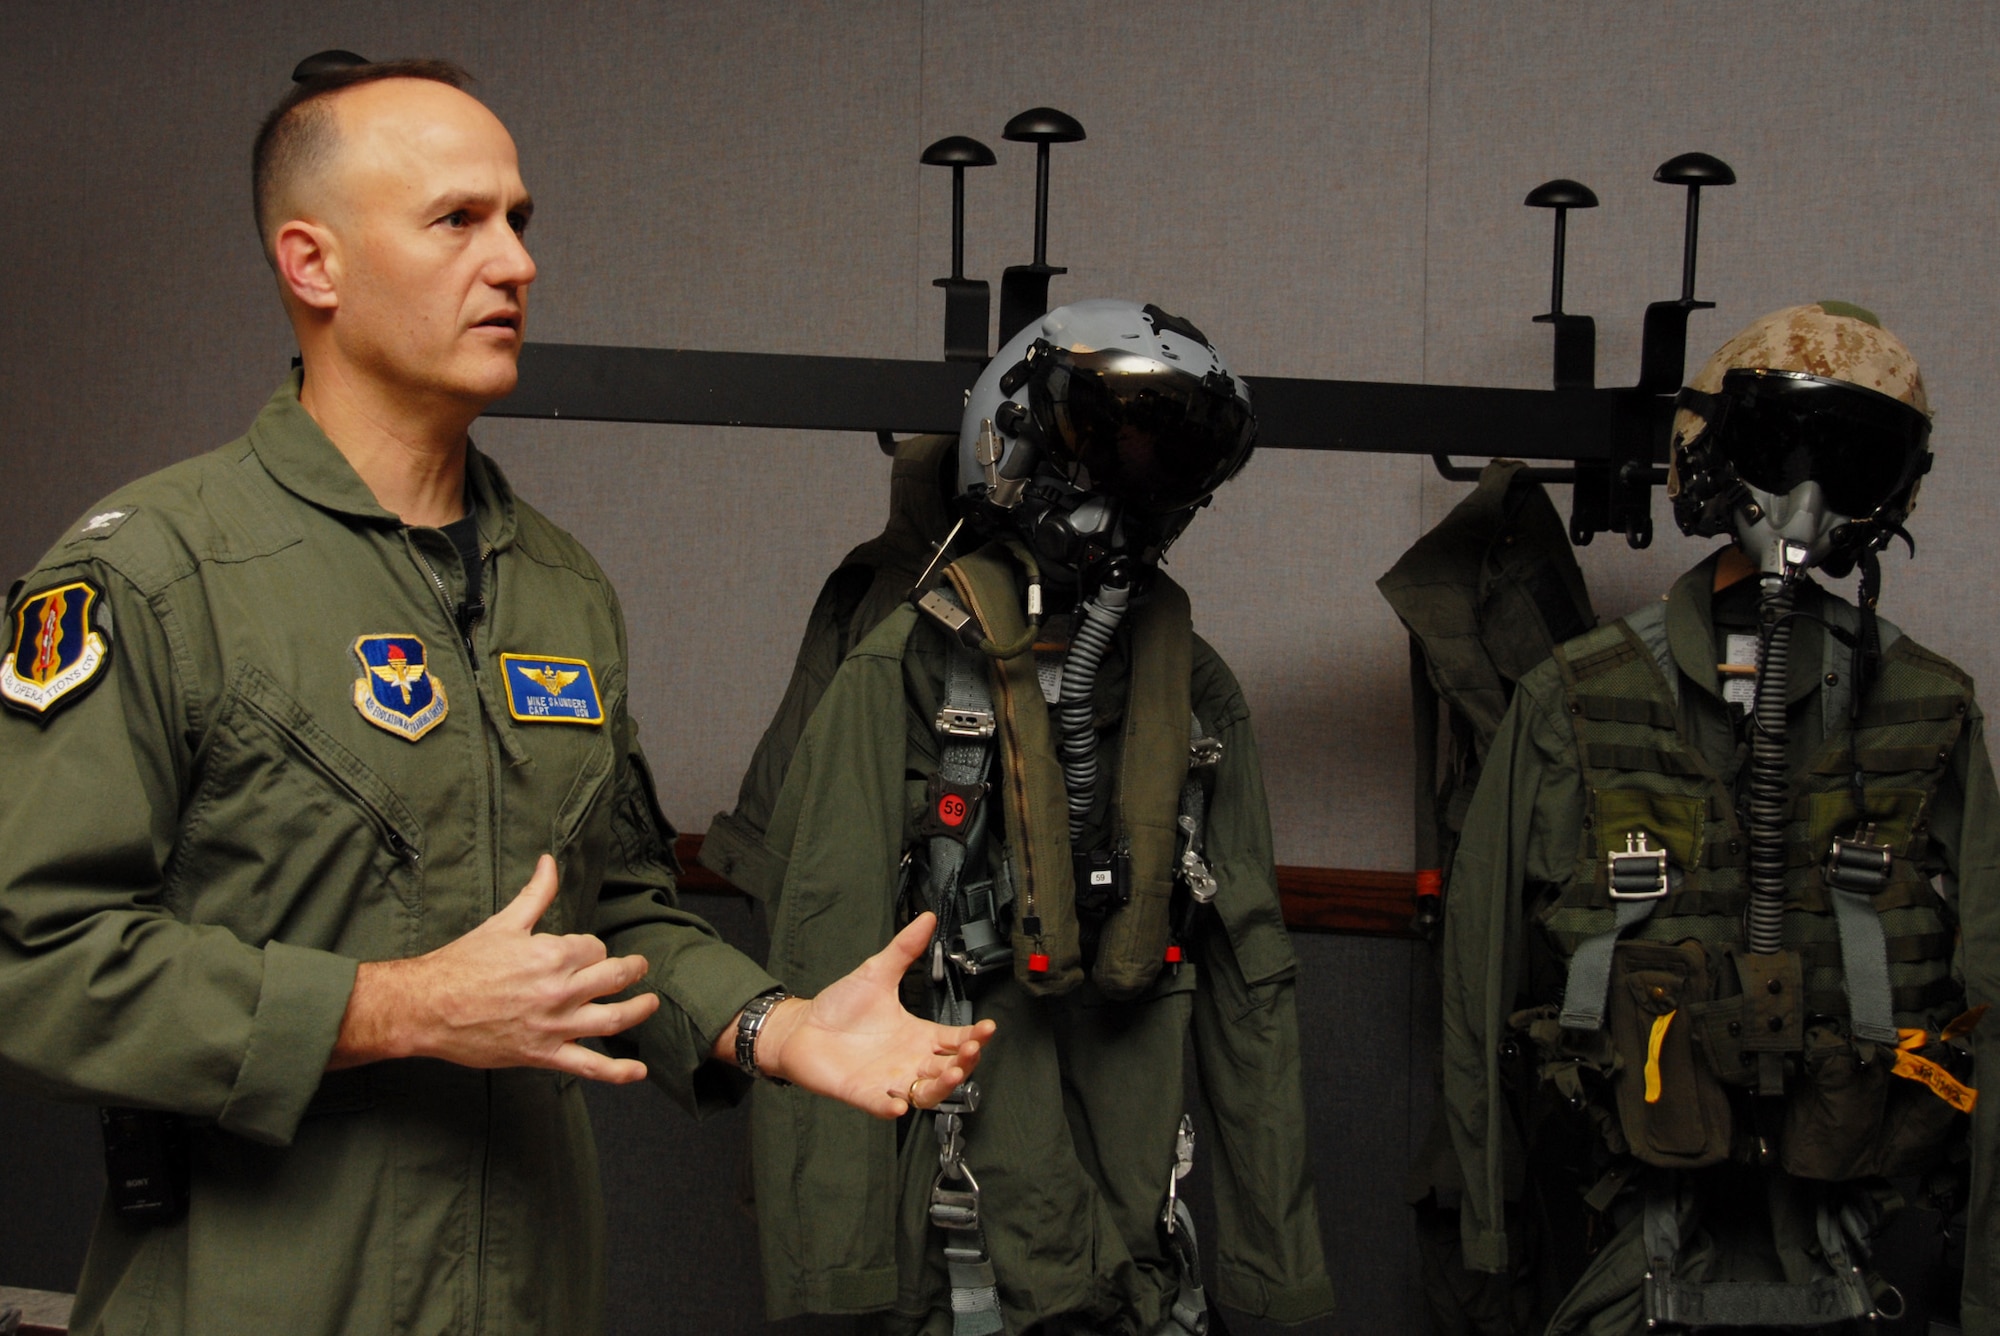 EGLIN AIR FORCE BASE, Fla. – Navy Capt. Mike Saunders, 33rd Operations Group deputy commander, describes the F-35 Joint Strike Fighter pilot equipment after getting measured for the new flight suit. The new pilot equipment includes everything from underwear to cold weather outer gear to anti-G garments. The measurement brought Eglin one step closer to being able to commence training, said Marine Col. Arthur Tomassetti, 33rd Fighter Wing commander. (U.S. Air Force photo/ Airman 1st Class Anthony Jennings)